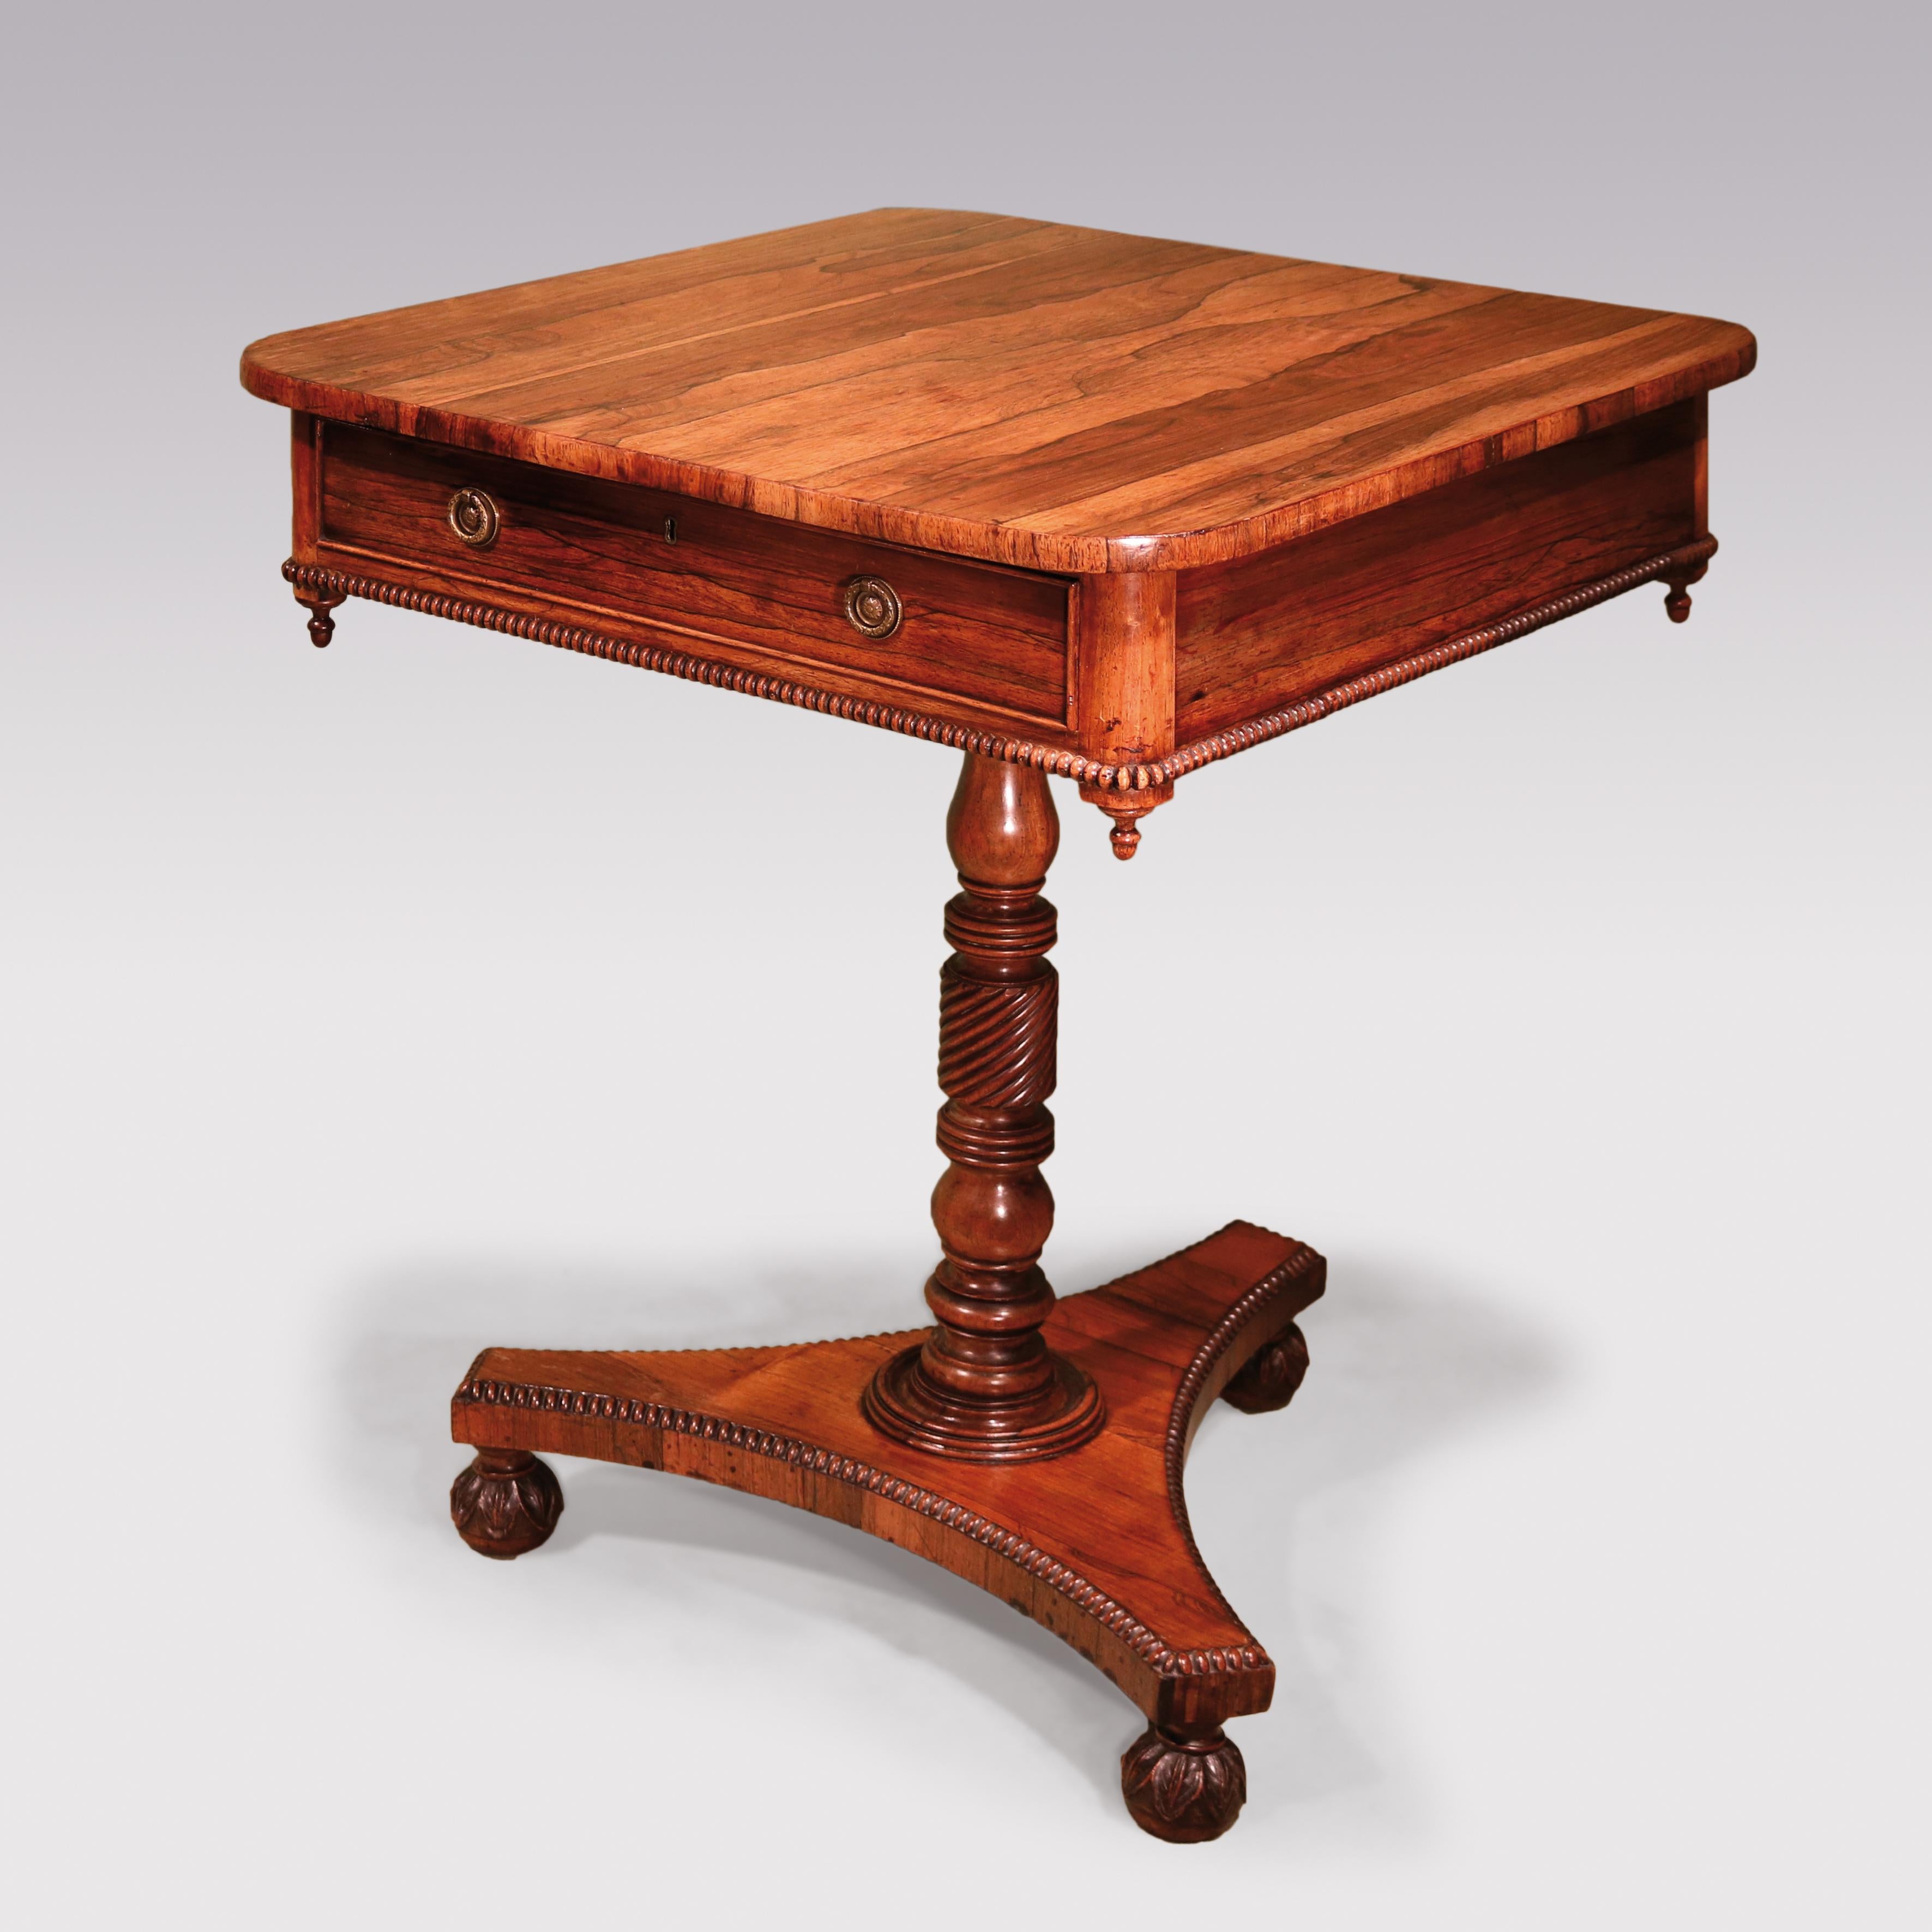 An attractive early 19th century Regency period figured and faded rosewood rectangular Occasional Table with drawer in frieze having beaded edge & drop pendants, raised on turned spiral twist stem ending on concave plinth with leaf carved ball feet.